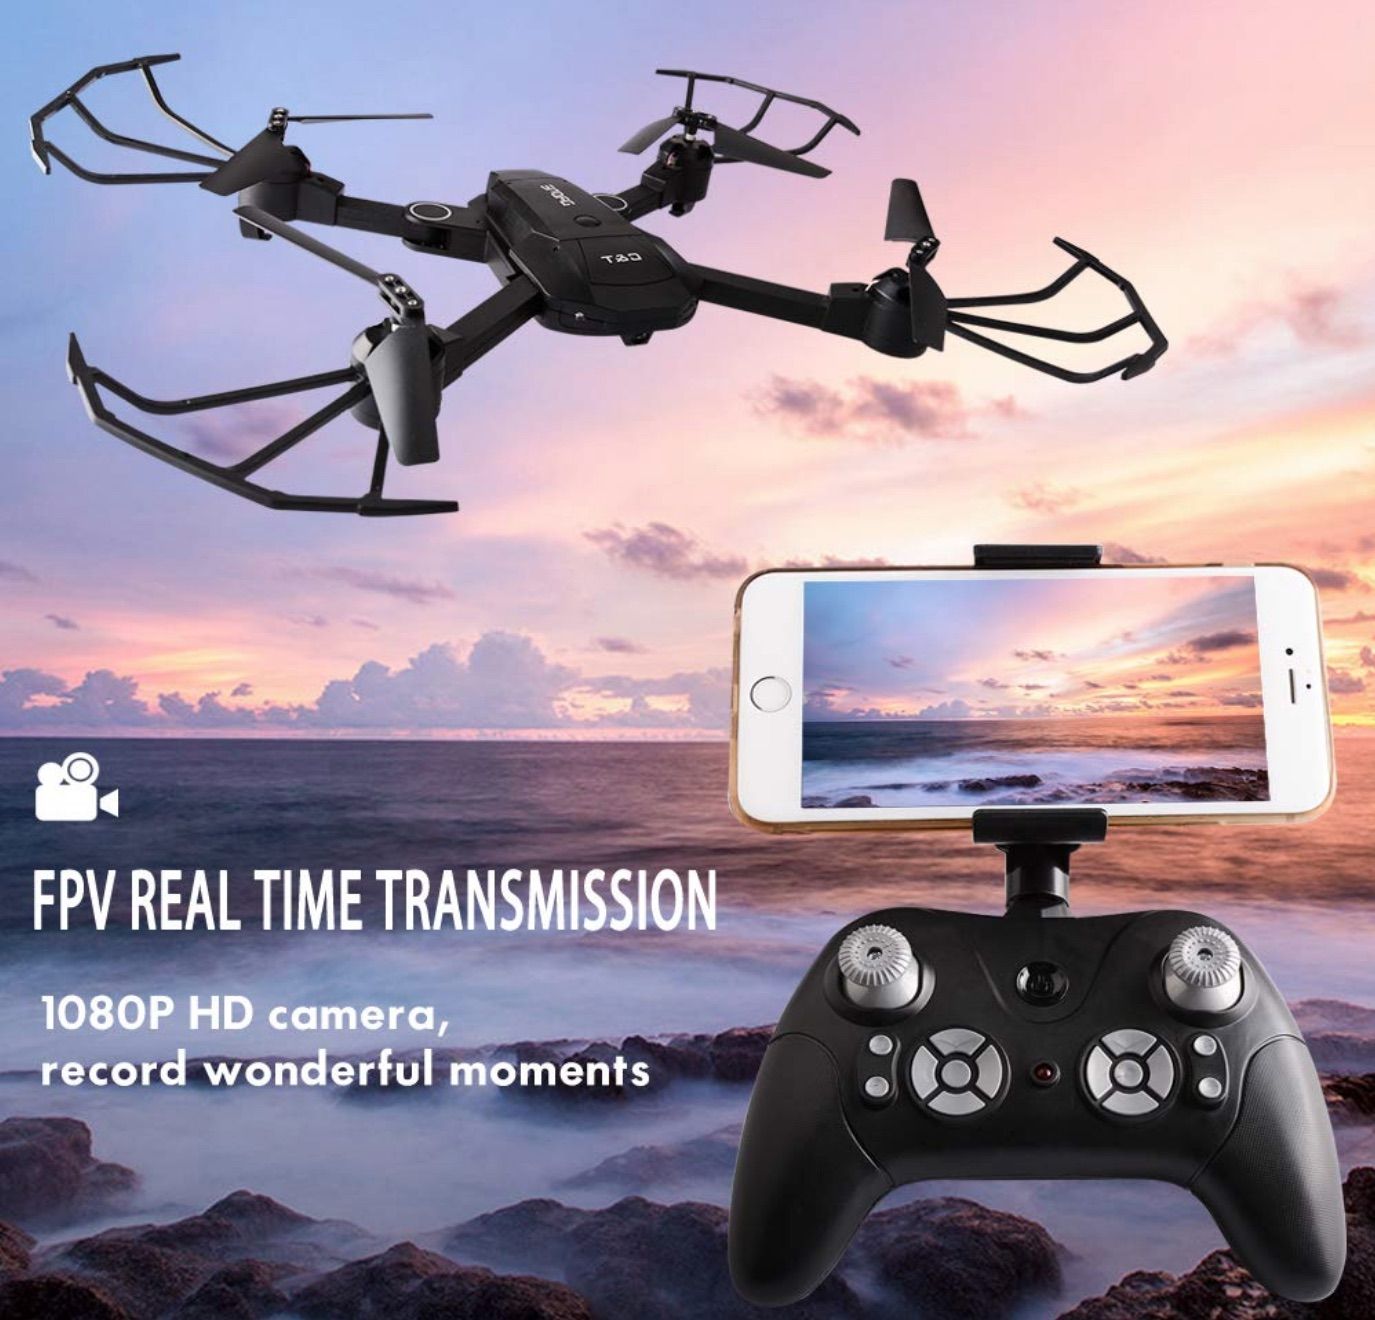 Yush WiFi FPV Drone with HD 1080P Camera Wide-Angle Live Video RC Quadcopter Altitude Hold Headless Mode Two Battery 2.4Ghz 4 Ch 6 Axis Compatible with 3D VR Headset Black 